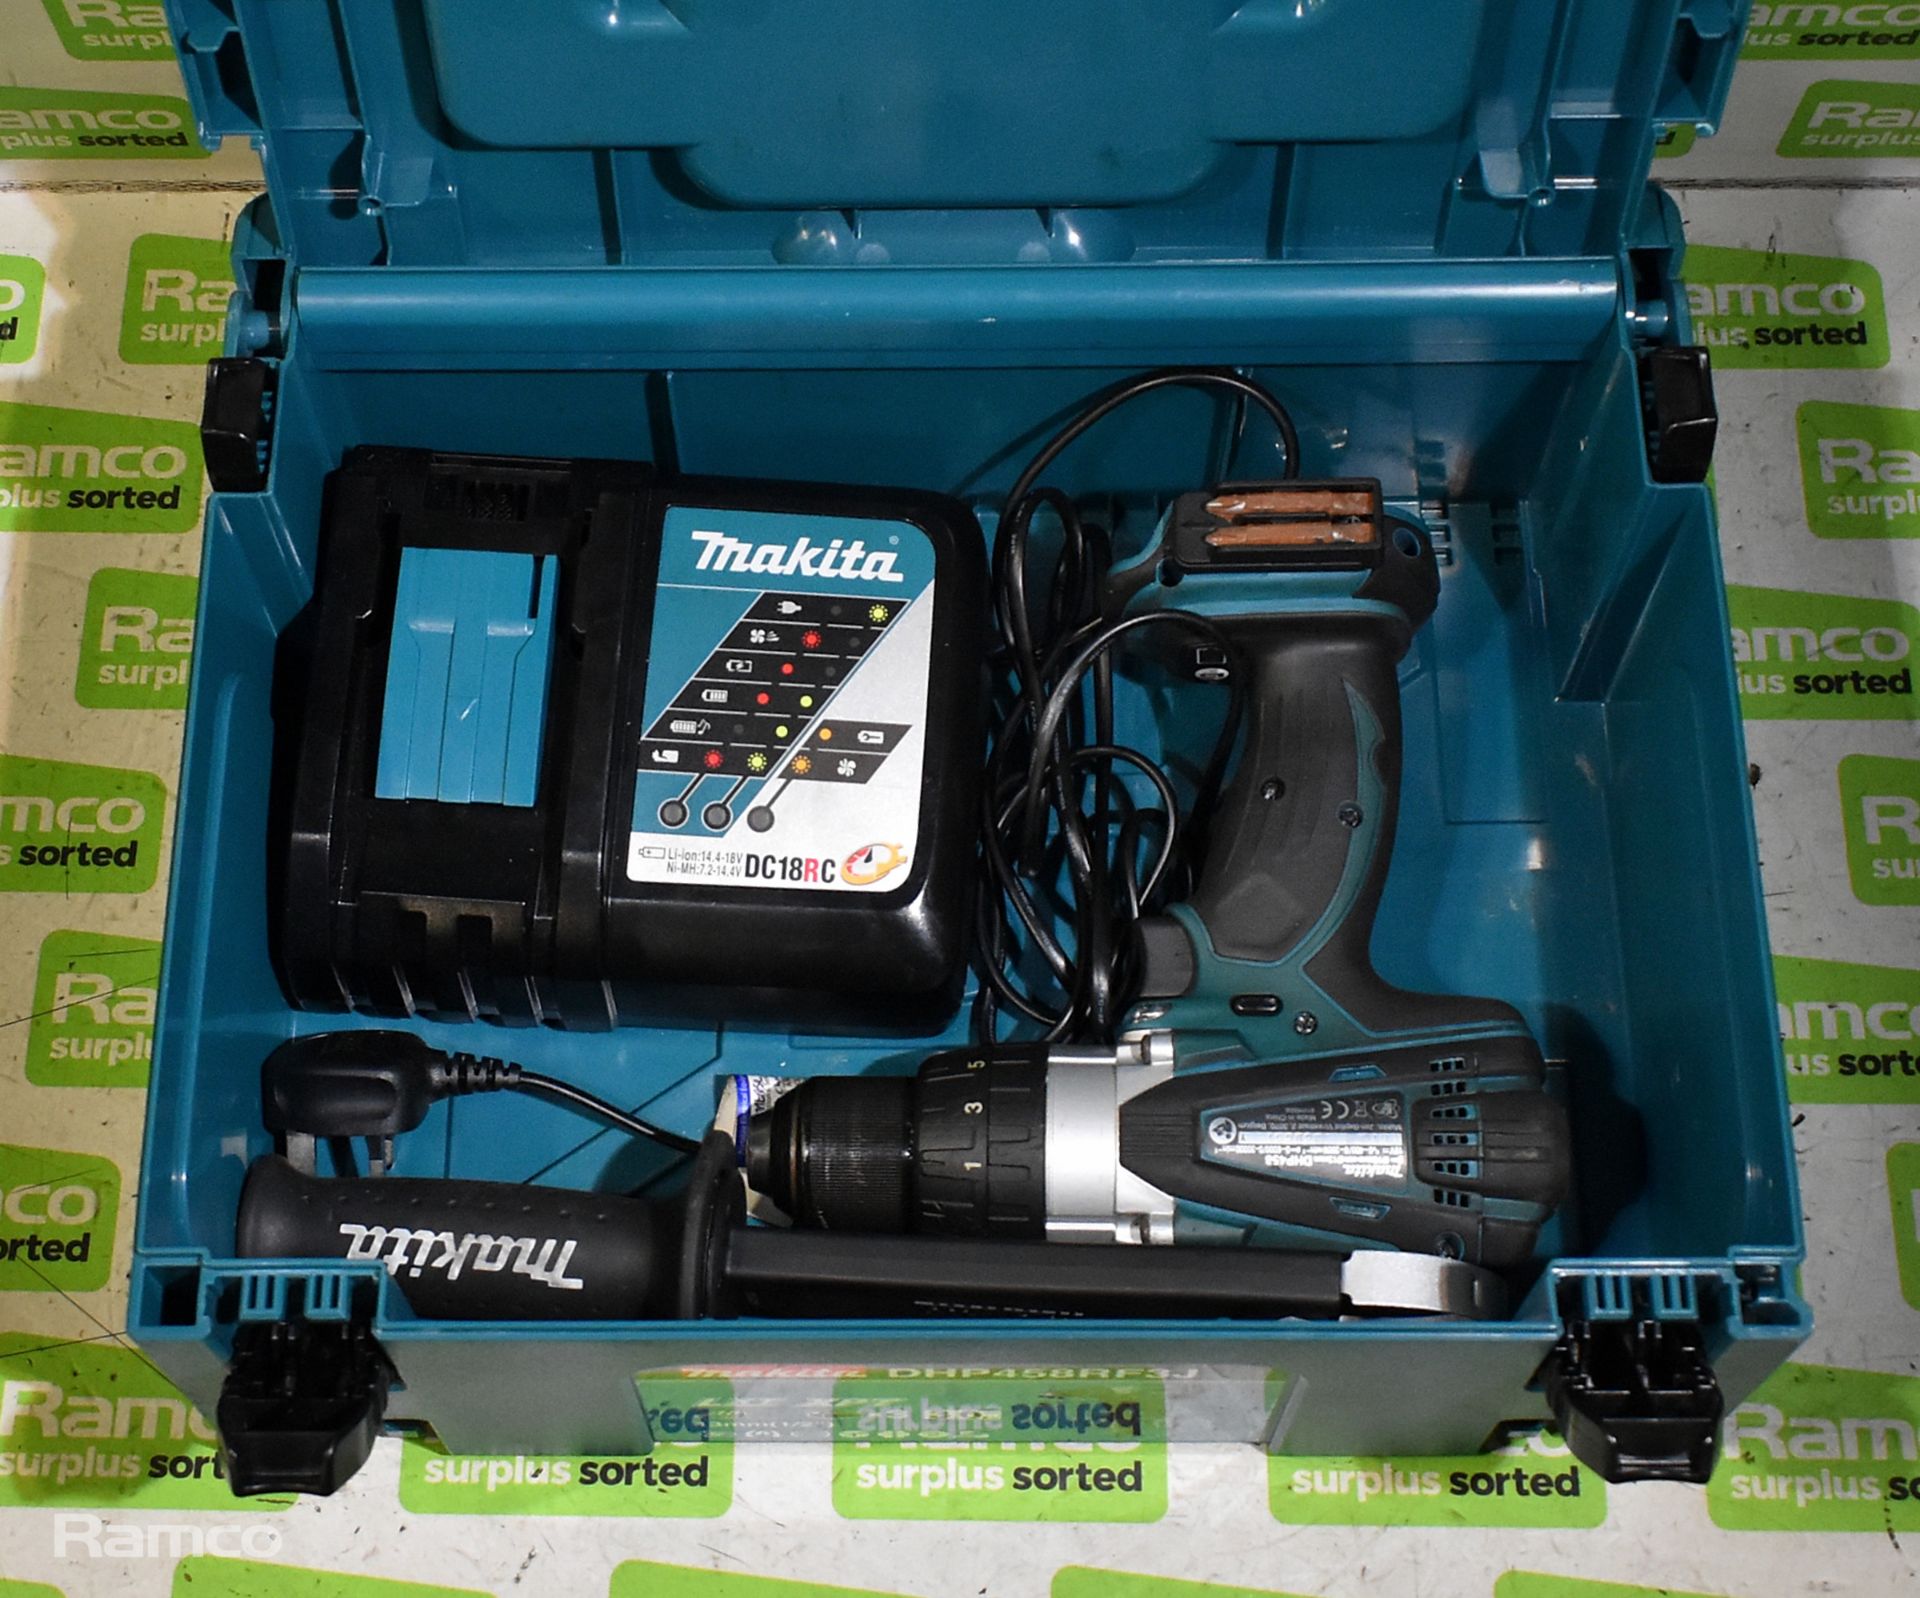 Makita DHP458 cordless drill with DC18RC battery charger, drill handle and storage case - Image 2 of 6